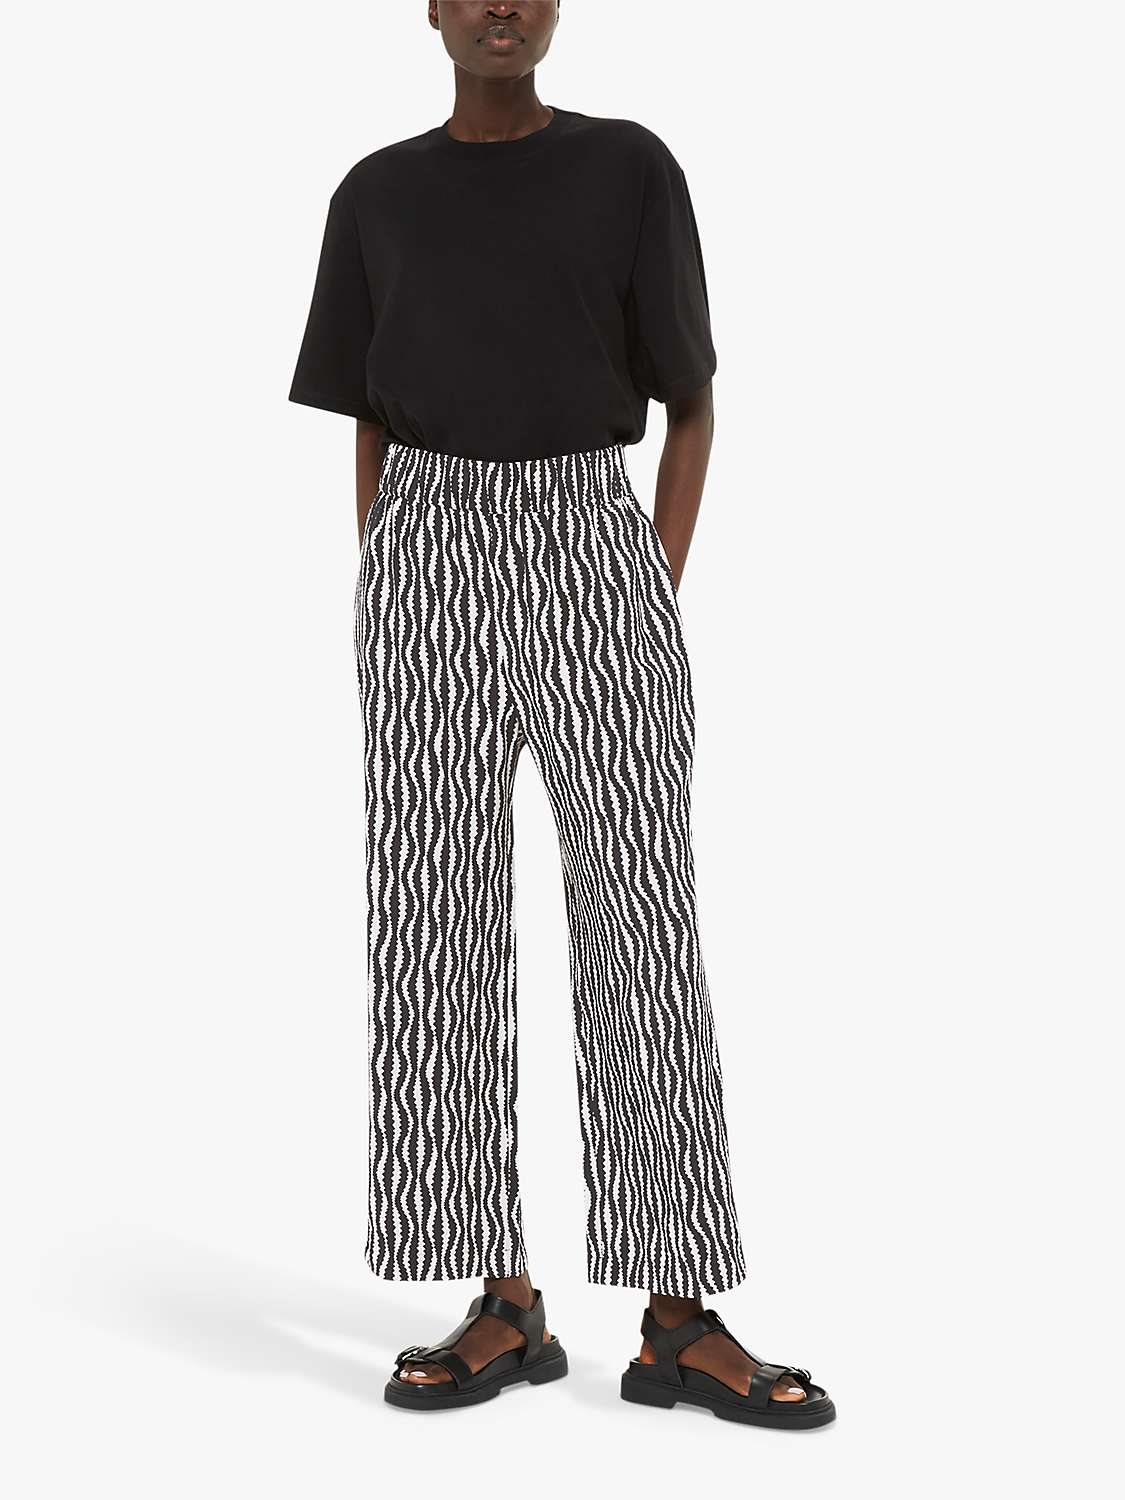 Buy Whistles Optical Rope Cropped Trousers, Black/White Online at johnlewis.com